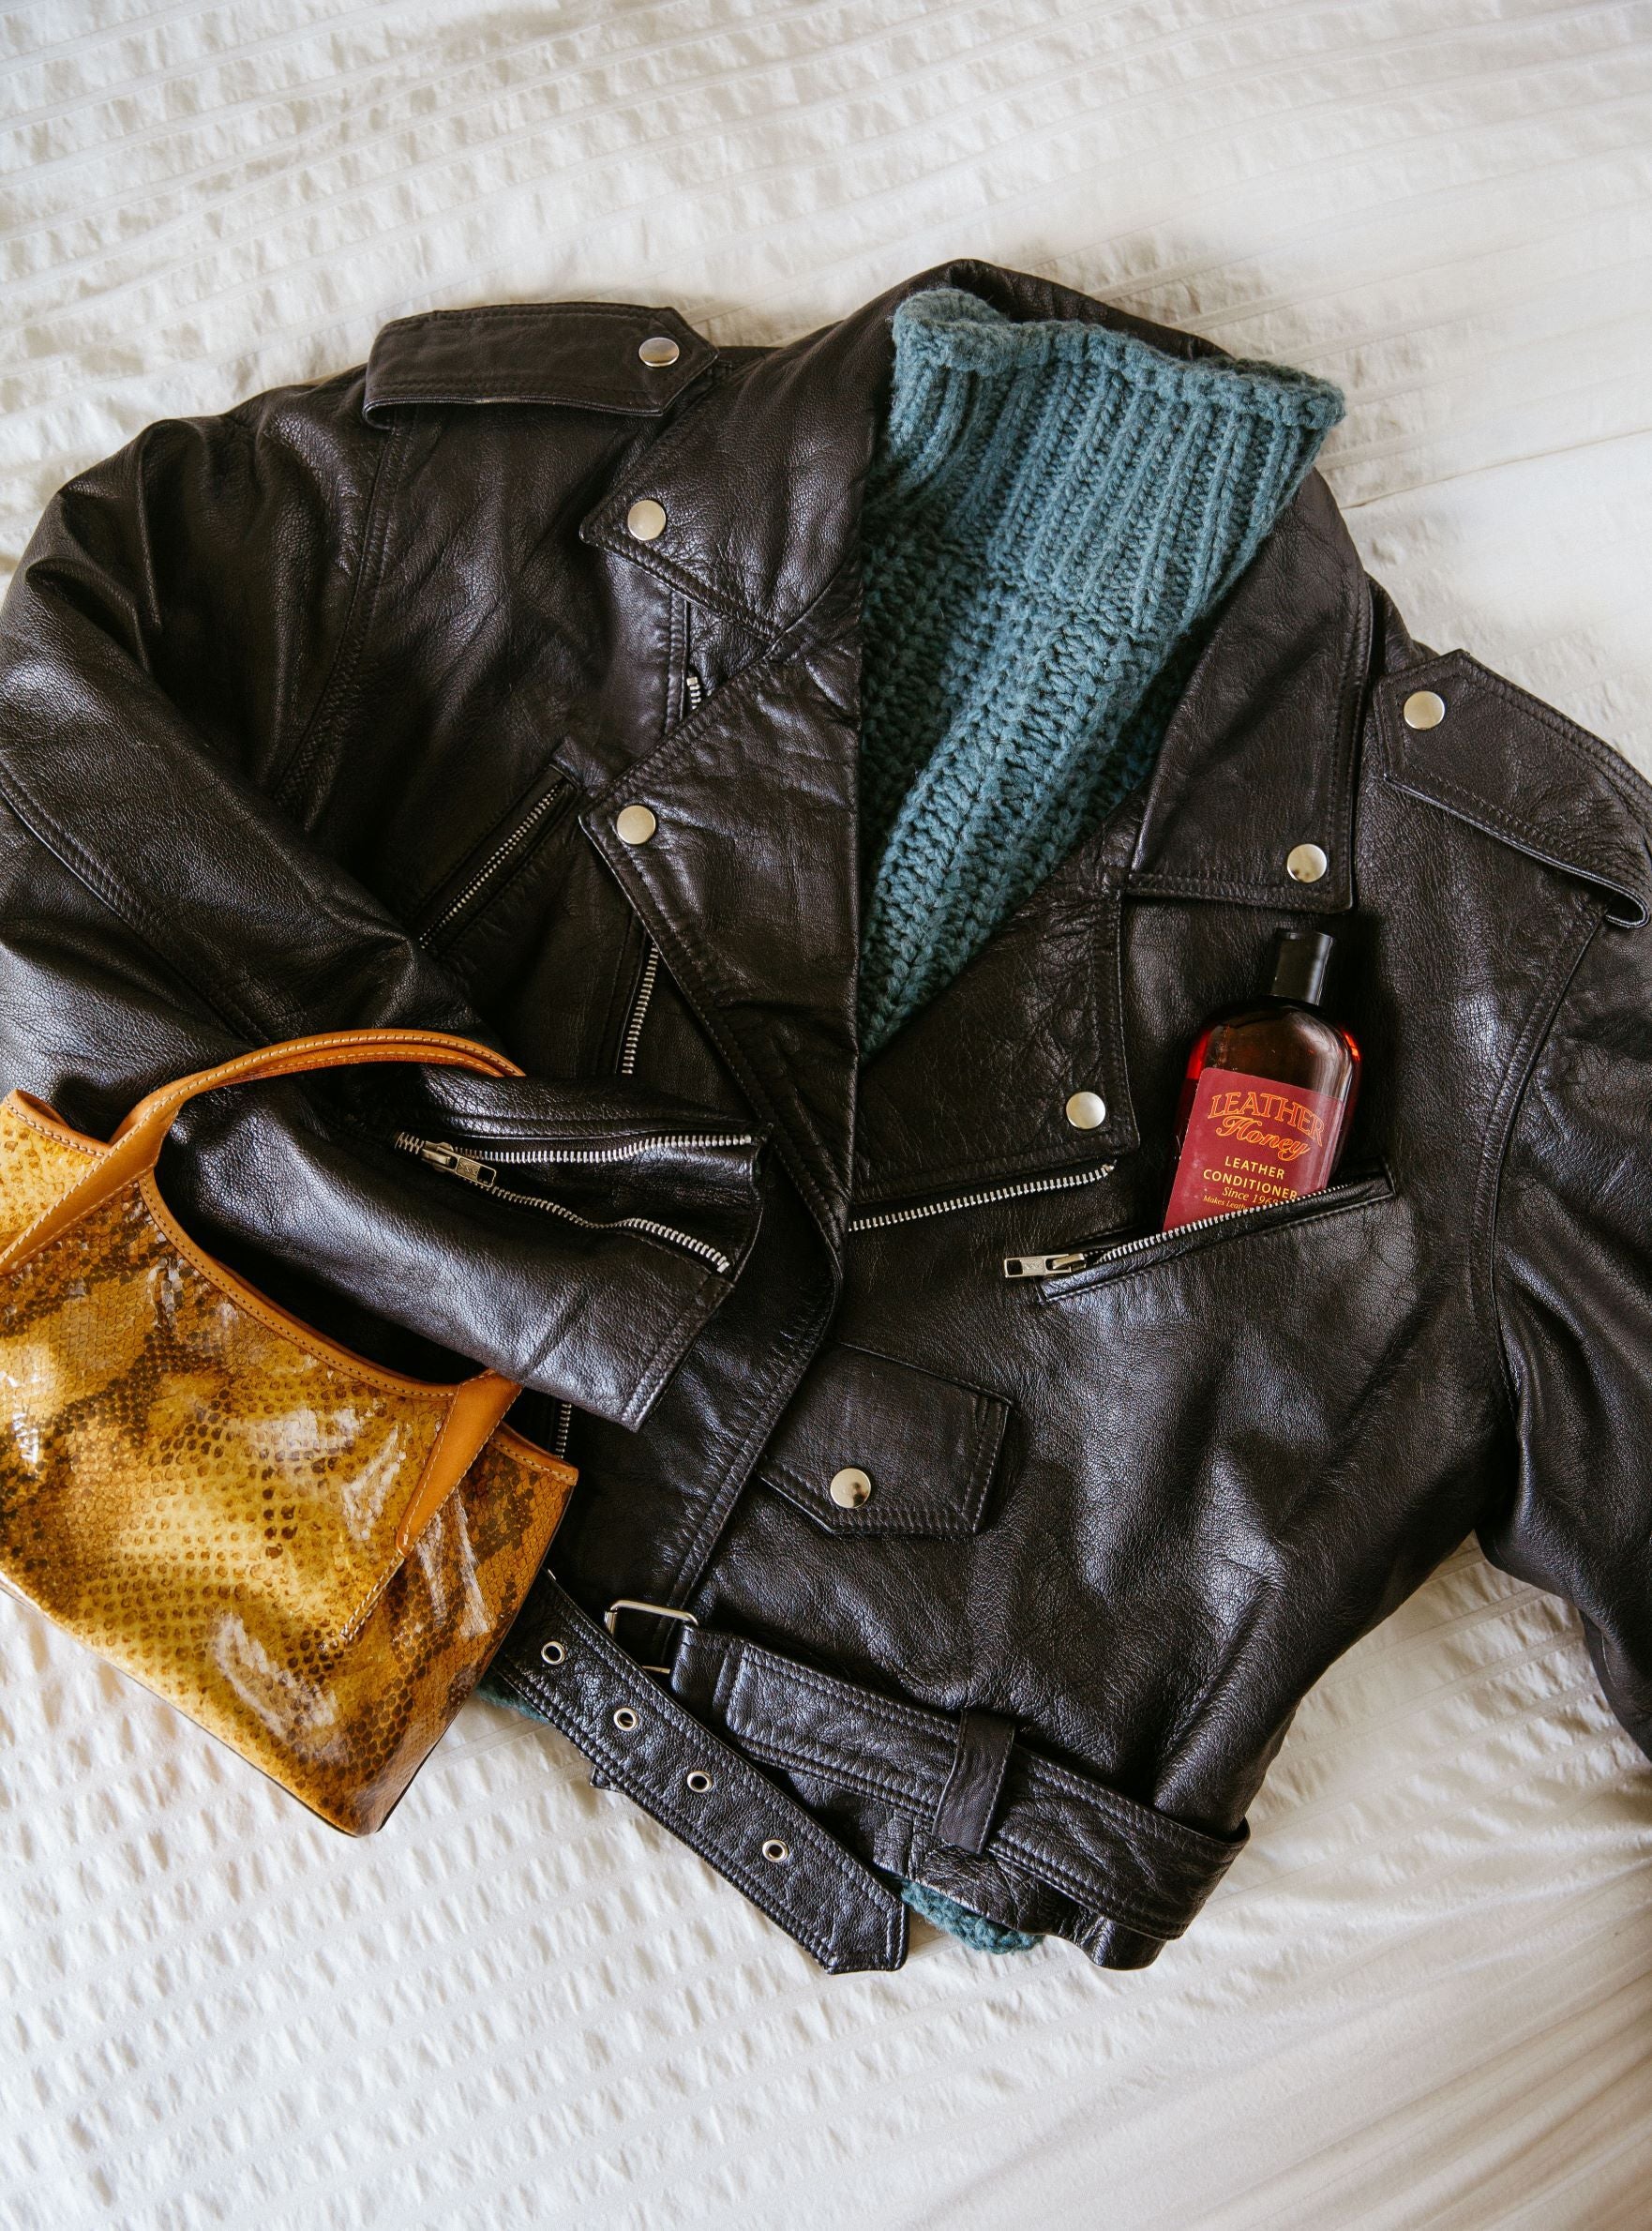 How to care for leather like dark leather items